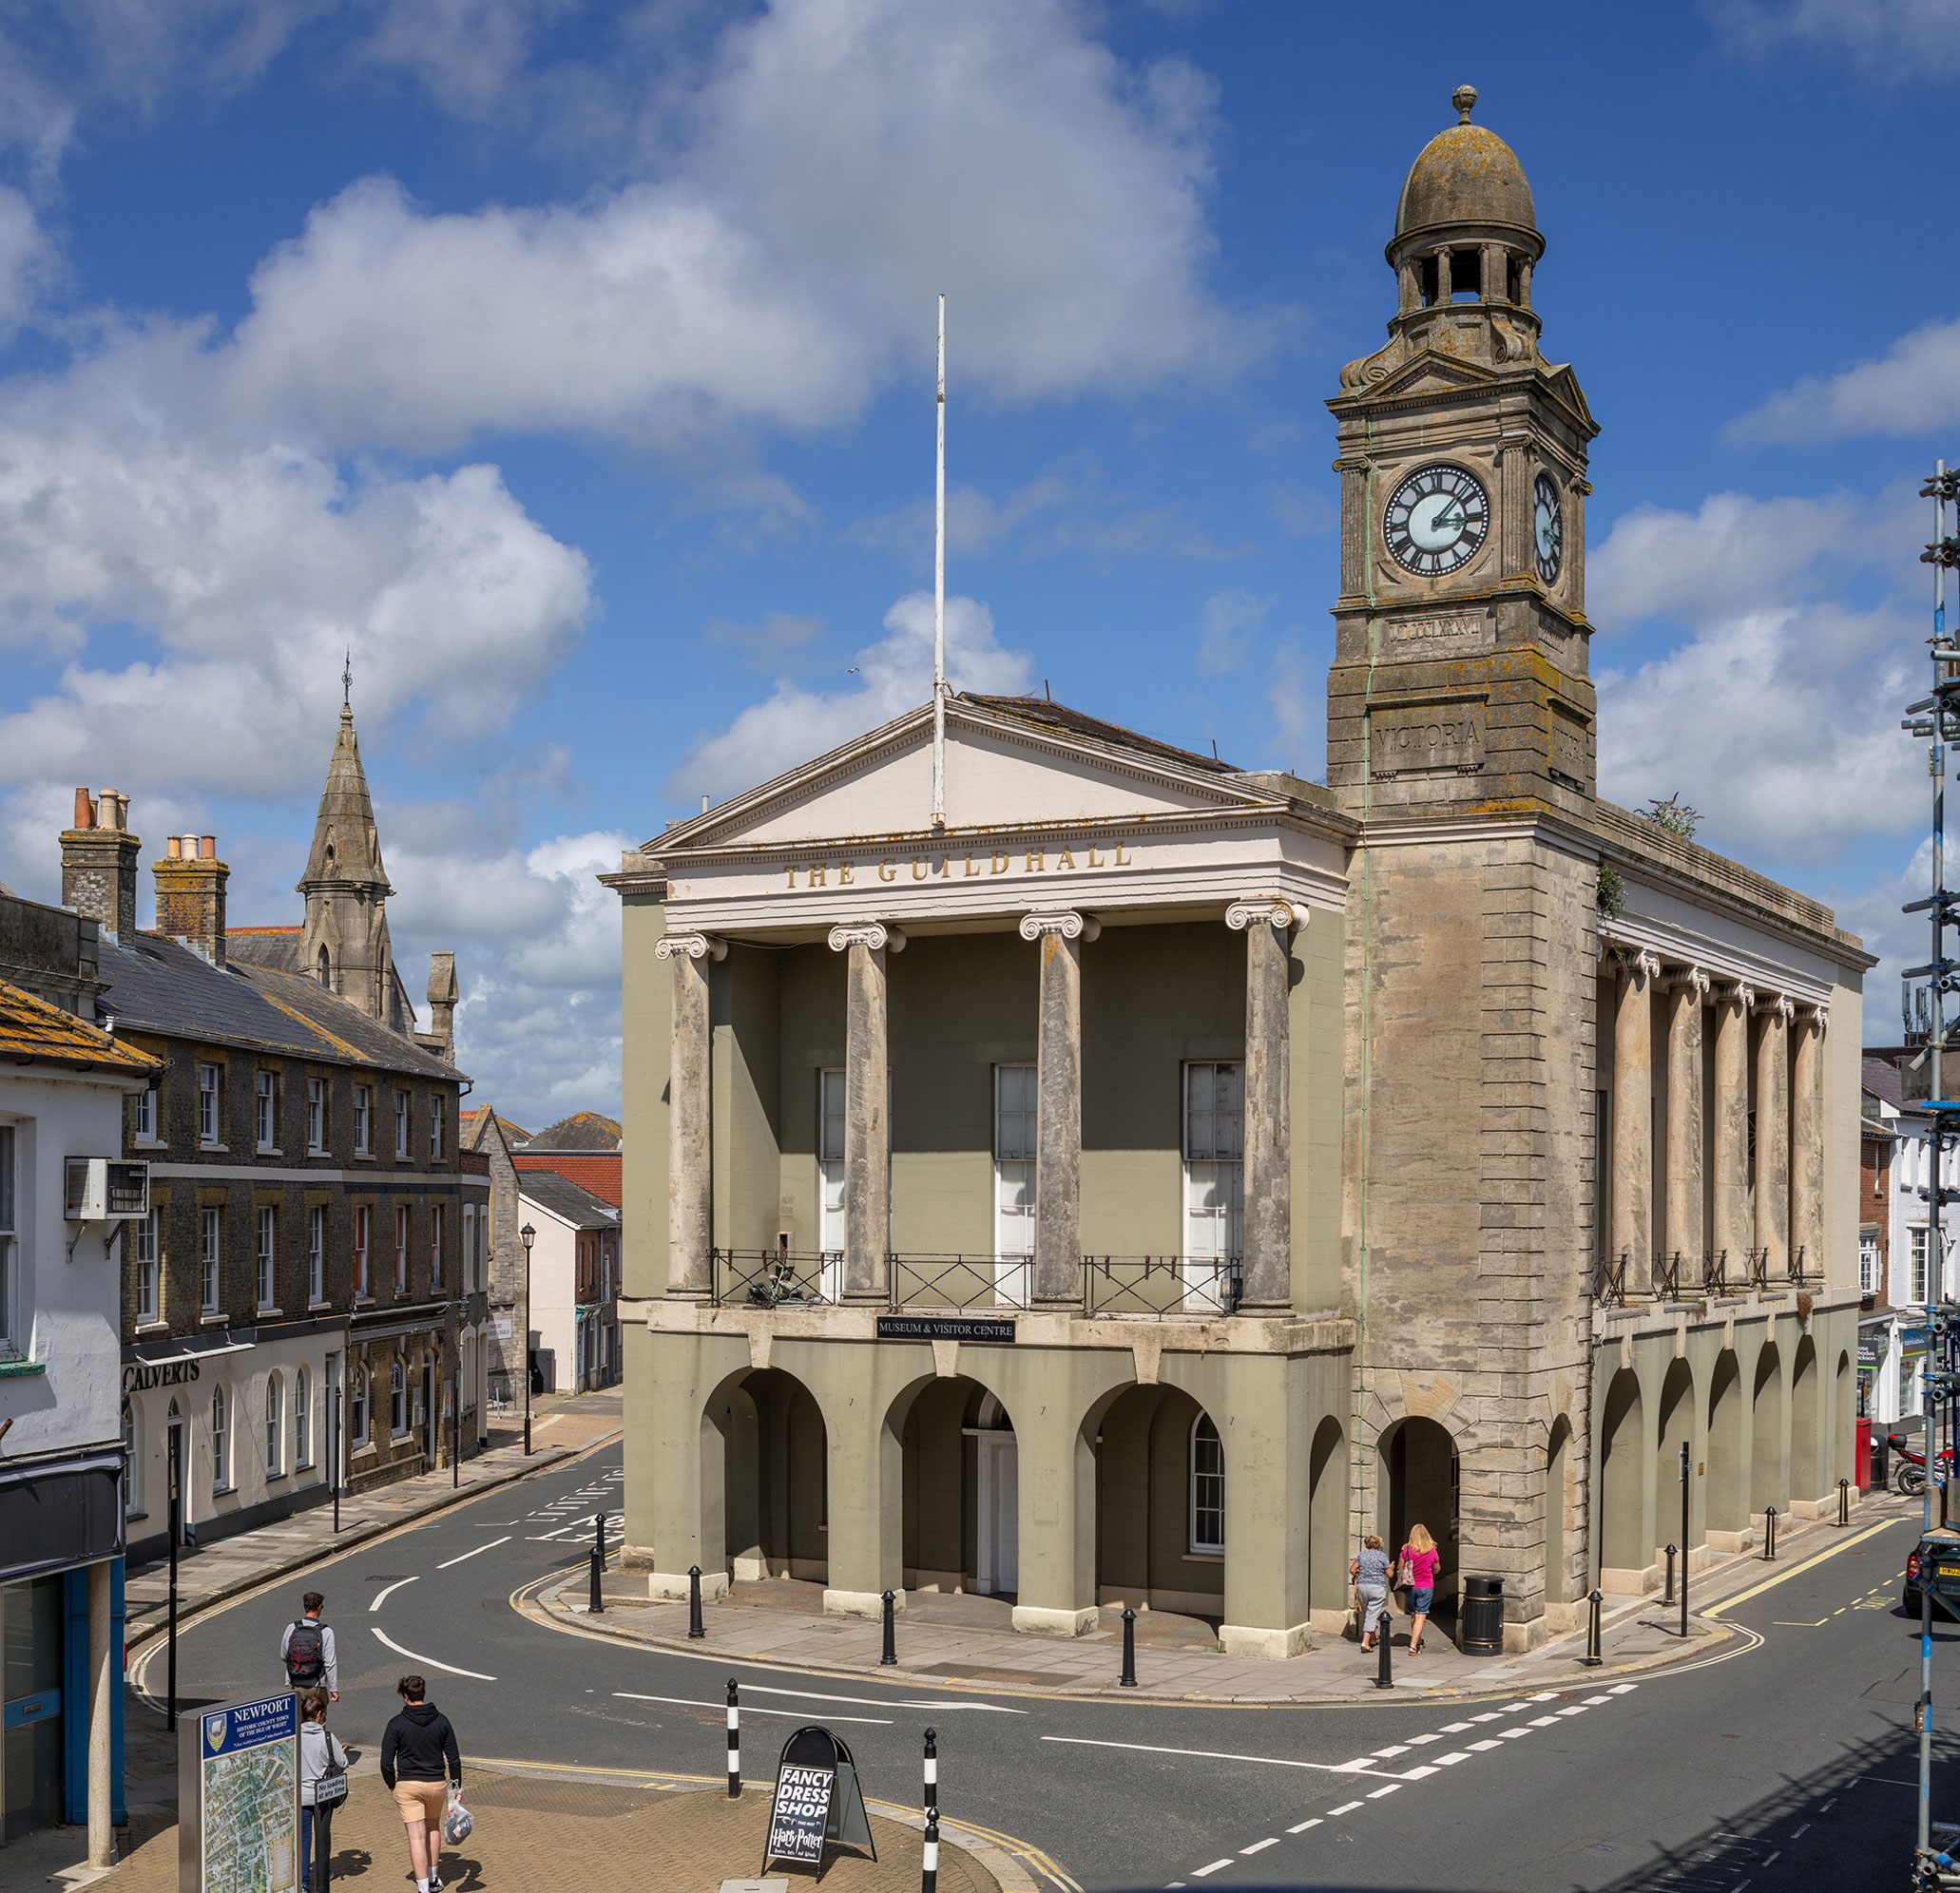 Modern colour photograph of a two-storey building with Ionic pediment and clock tower.